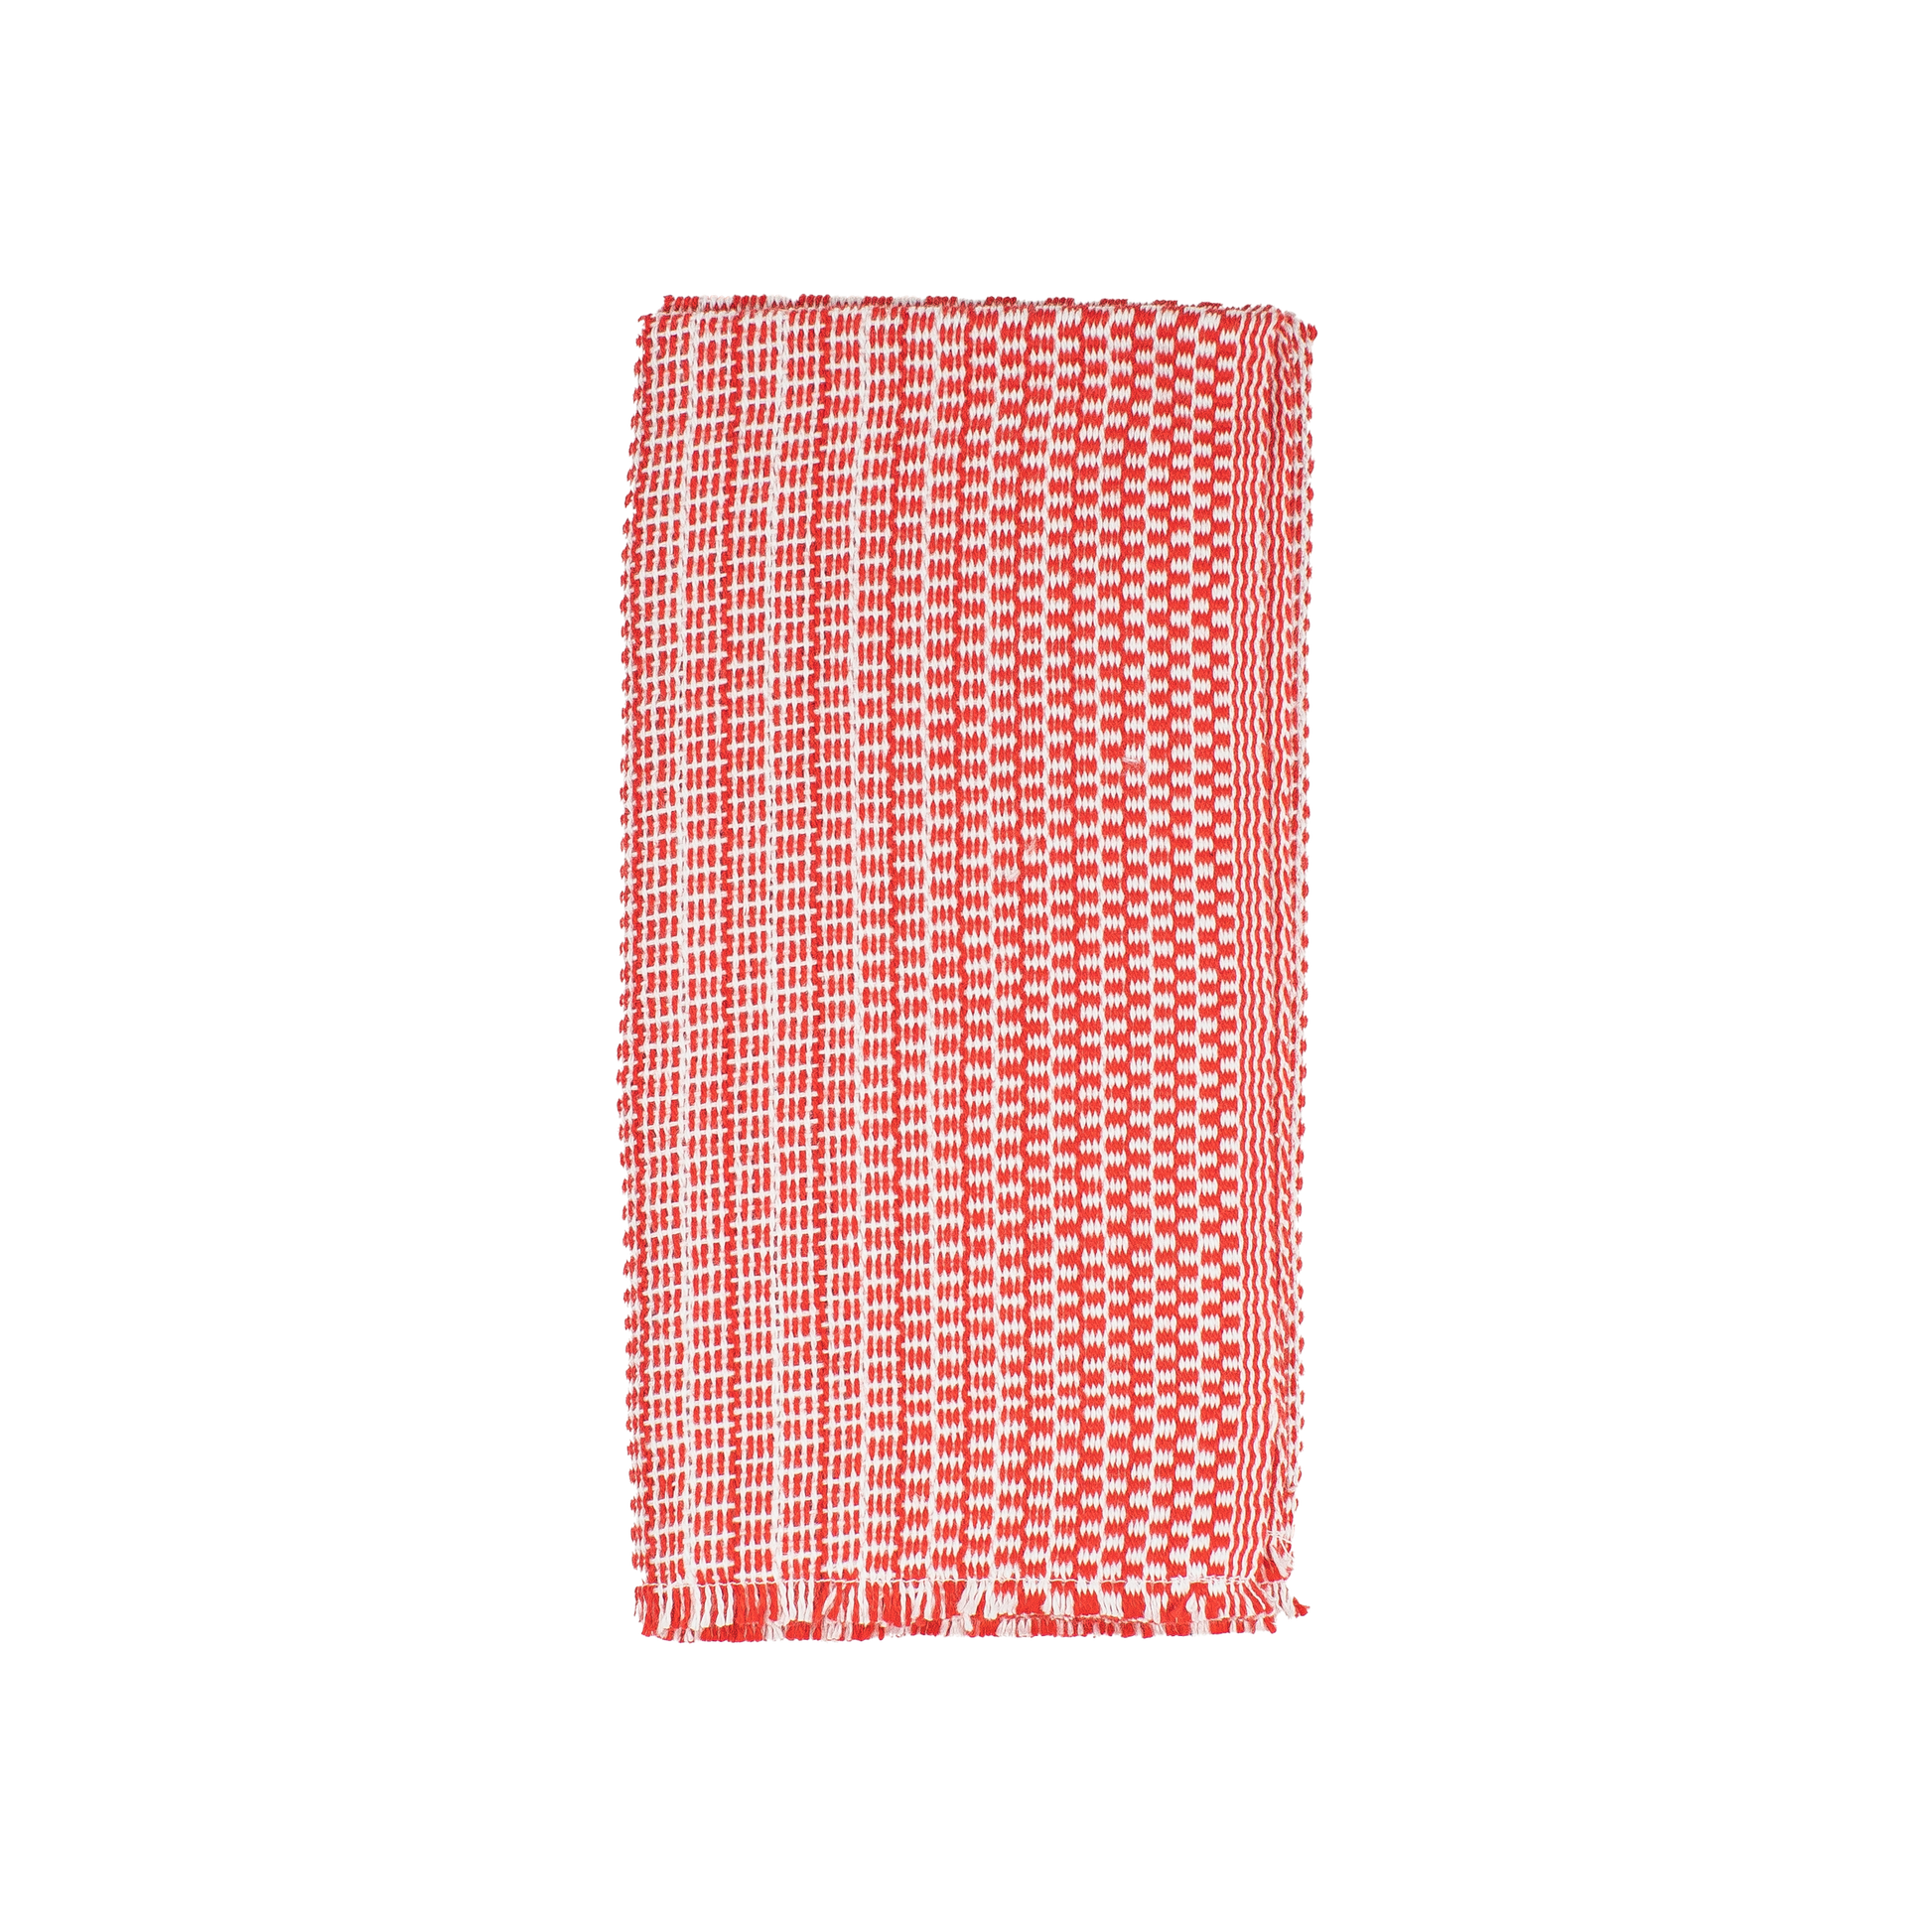 Red and white patterned napkin